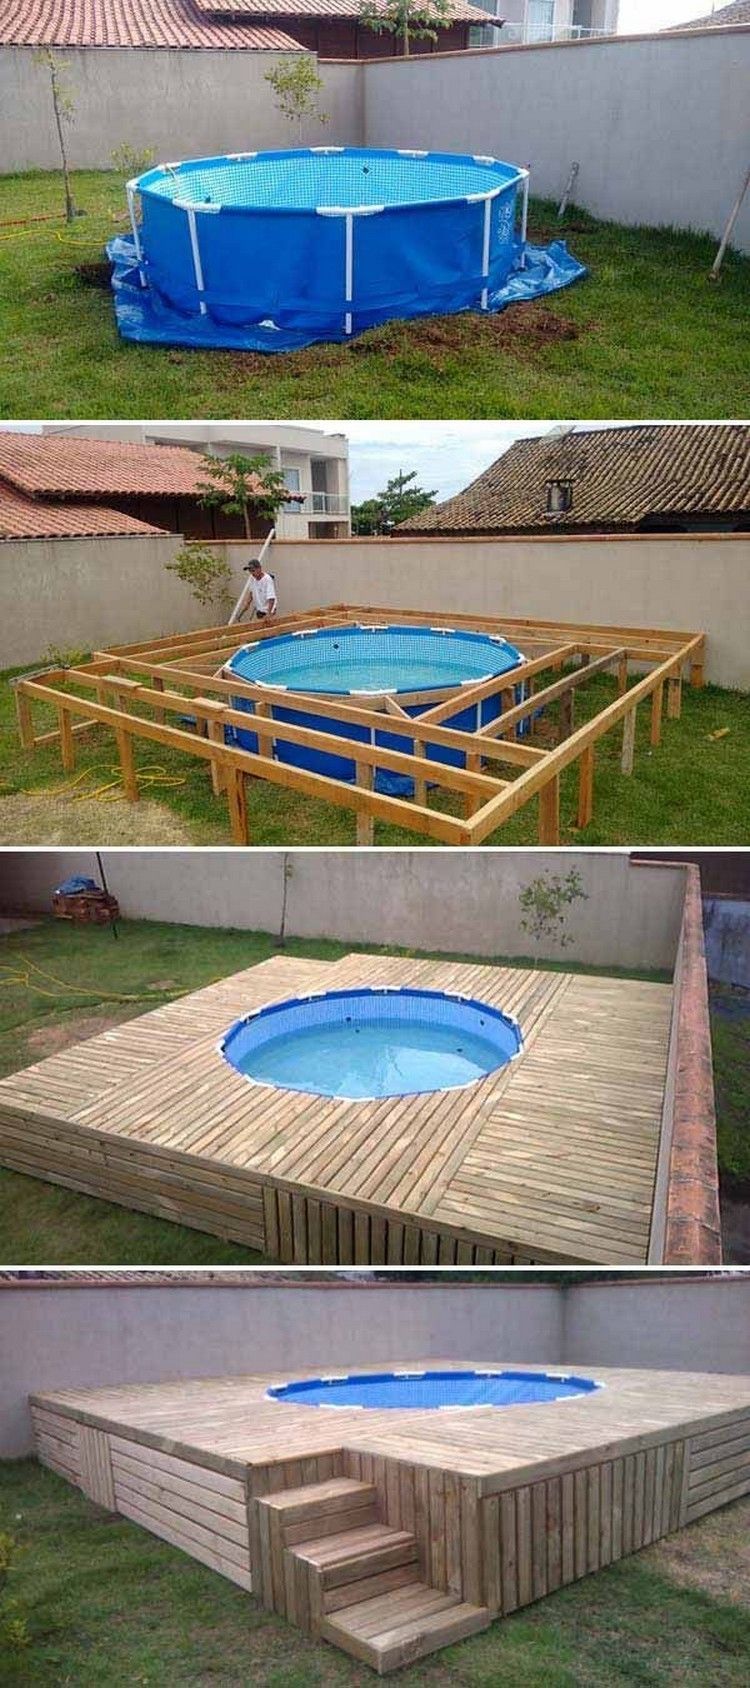 Want to have a pool party? Then you can check out this pool pallet wood project! We have first got a huge pool and placed it in